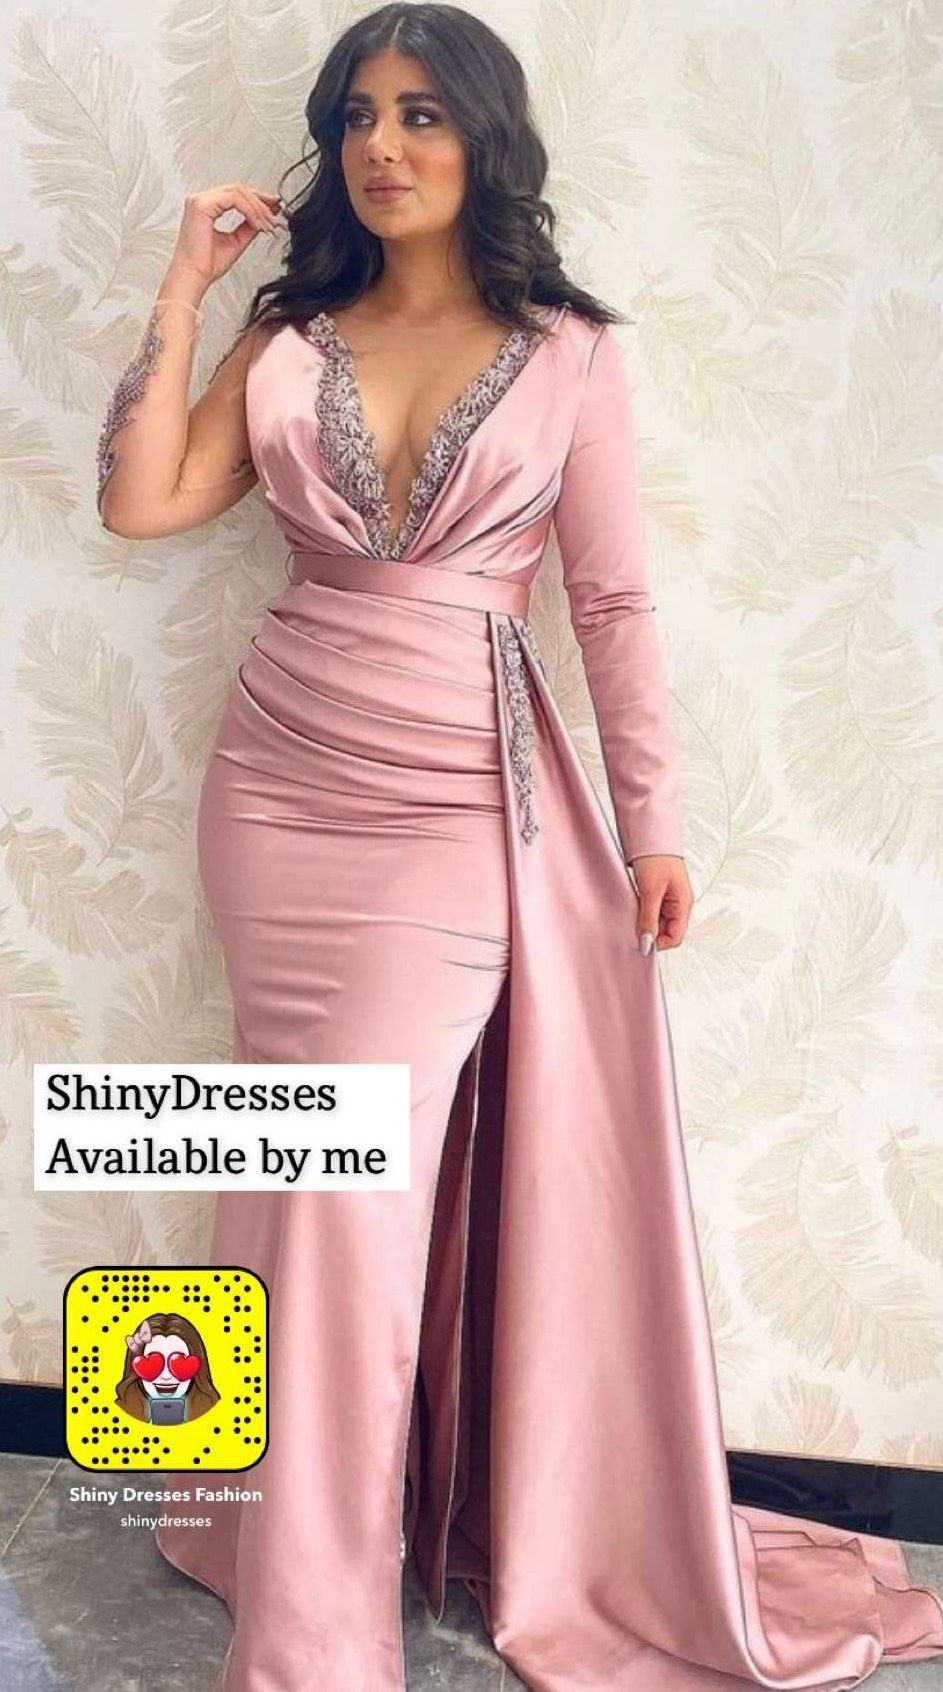 Shiny Dresses Fashion Size 6 Prom Plunge Lace Light Pink Side Slit Dress on Queenly